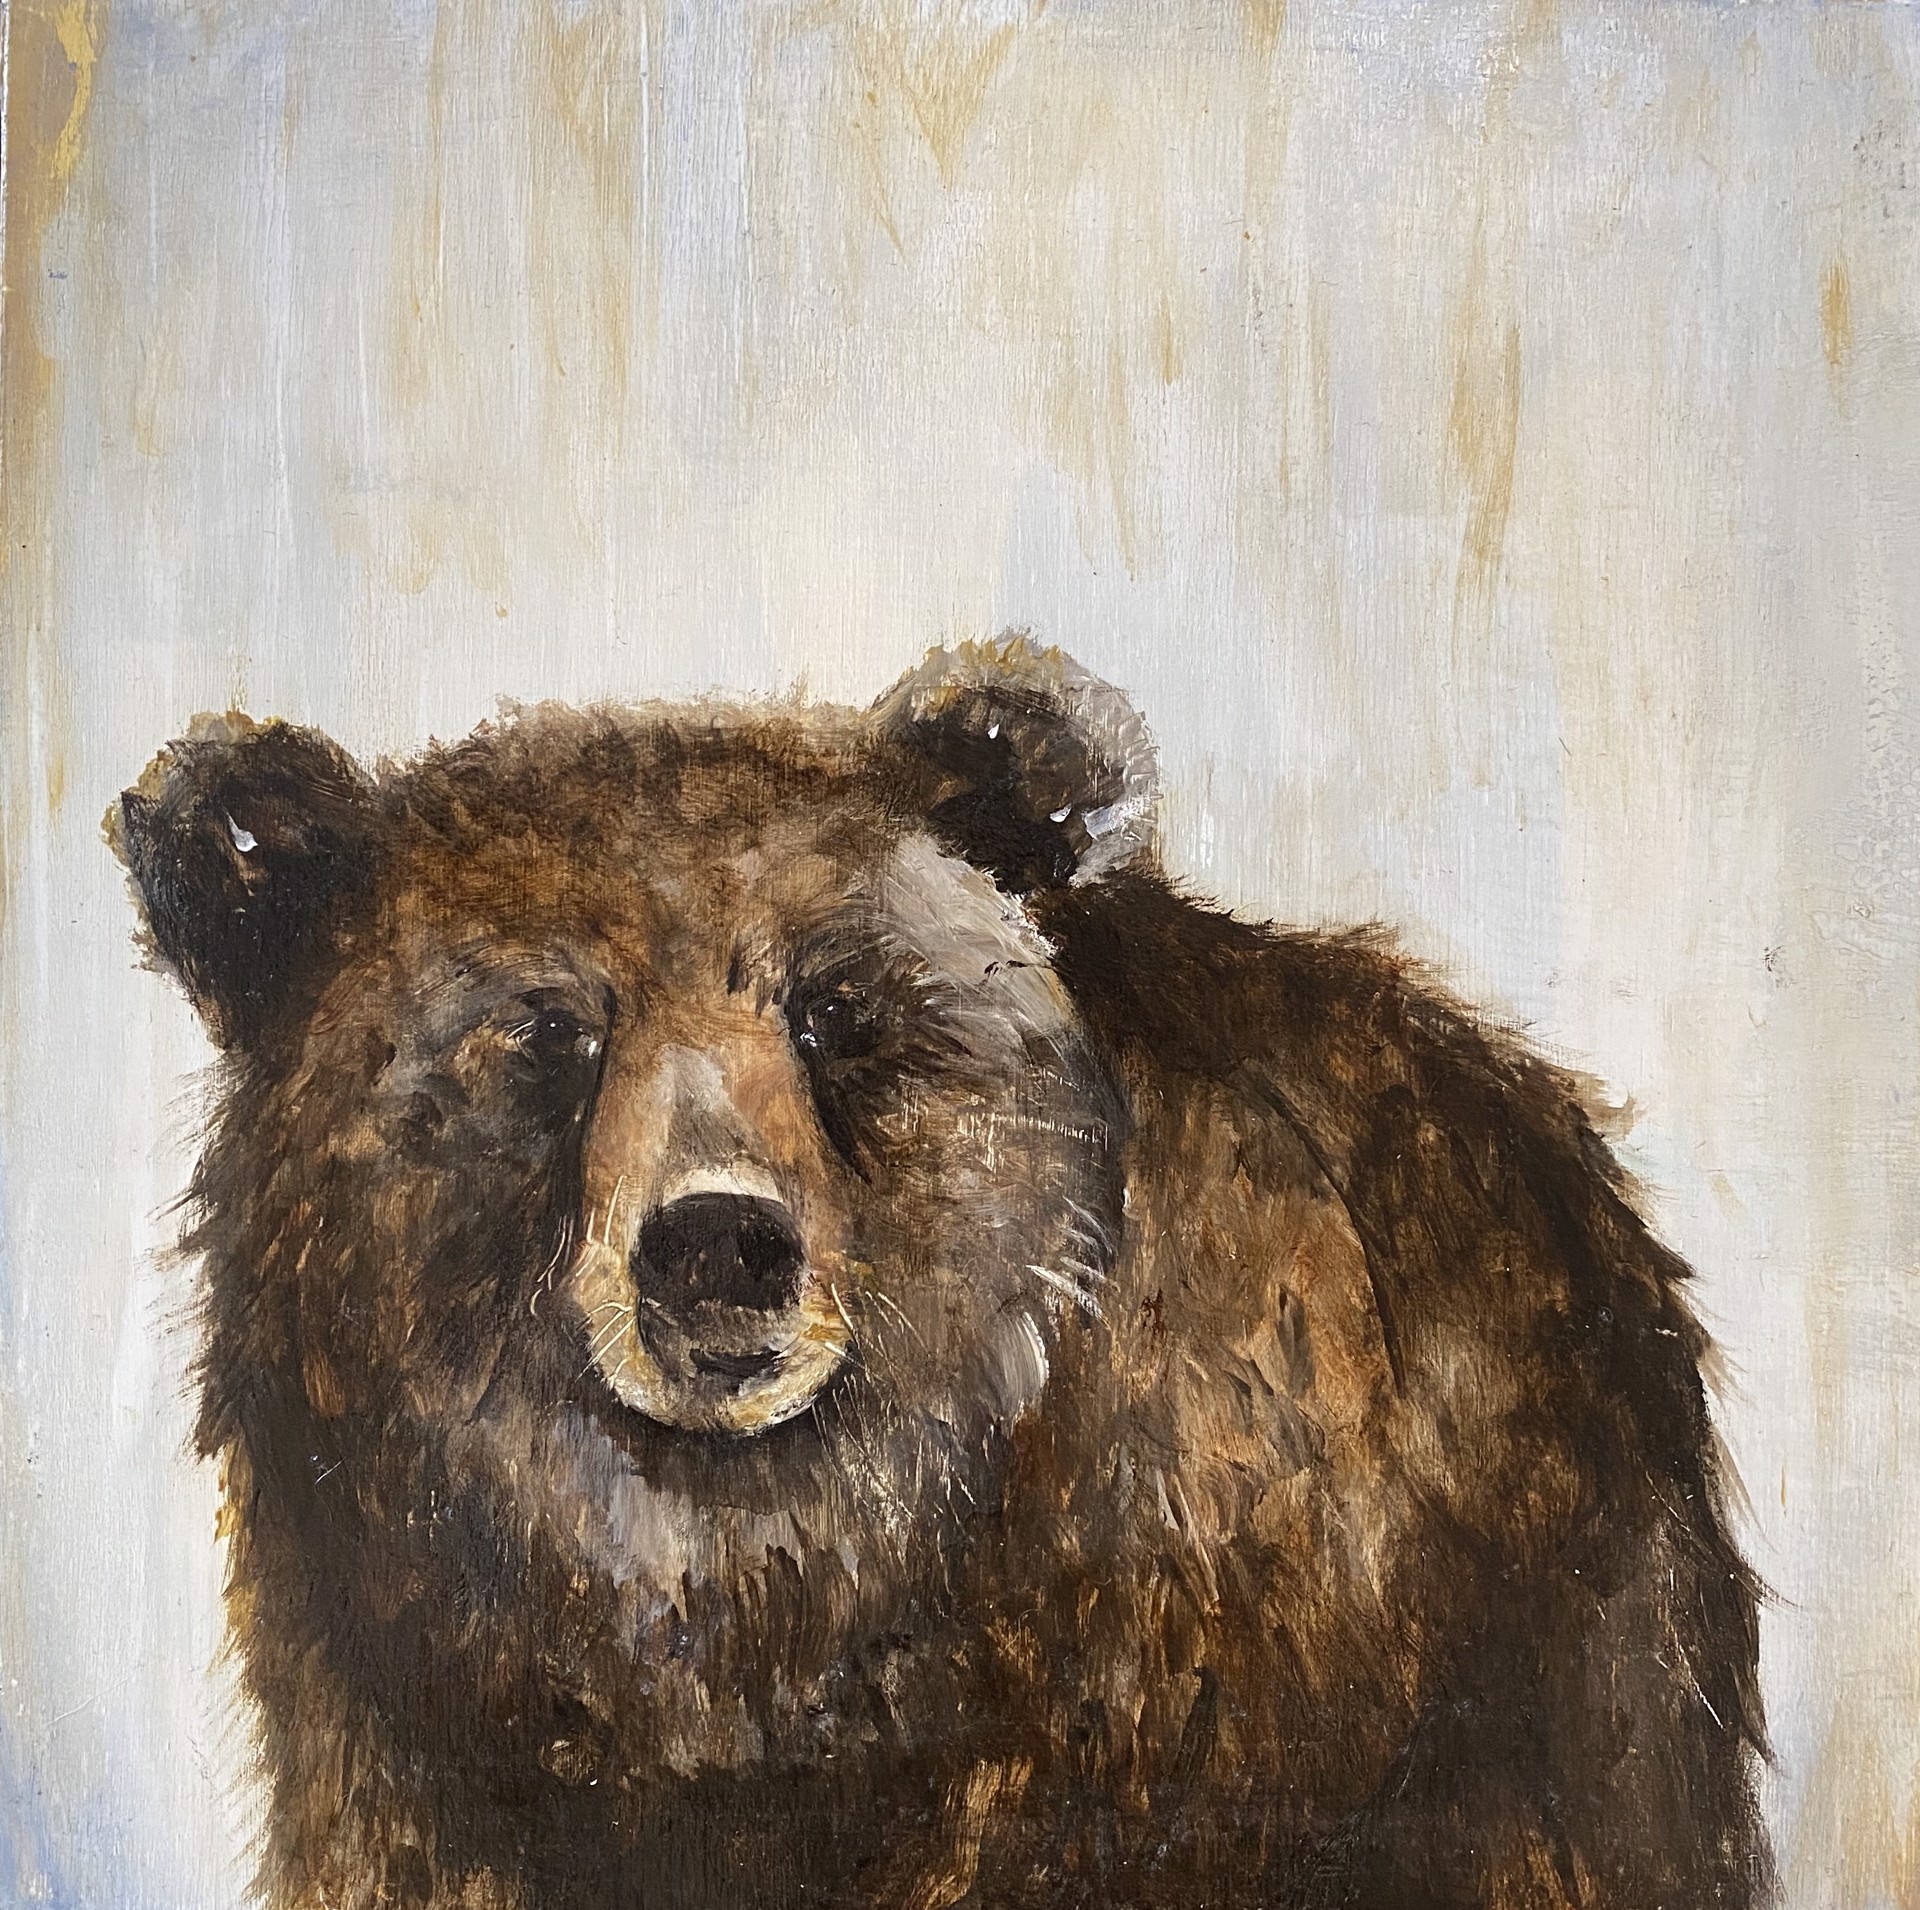 An Original Oil Painting Of A Bear Portrait In A Contemporary Style Featuring A Abstract Cream And Yellow Background, By Jenna Von Benedikt 